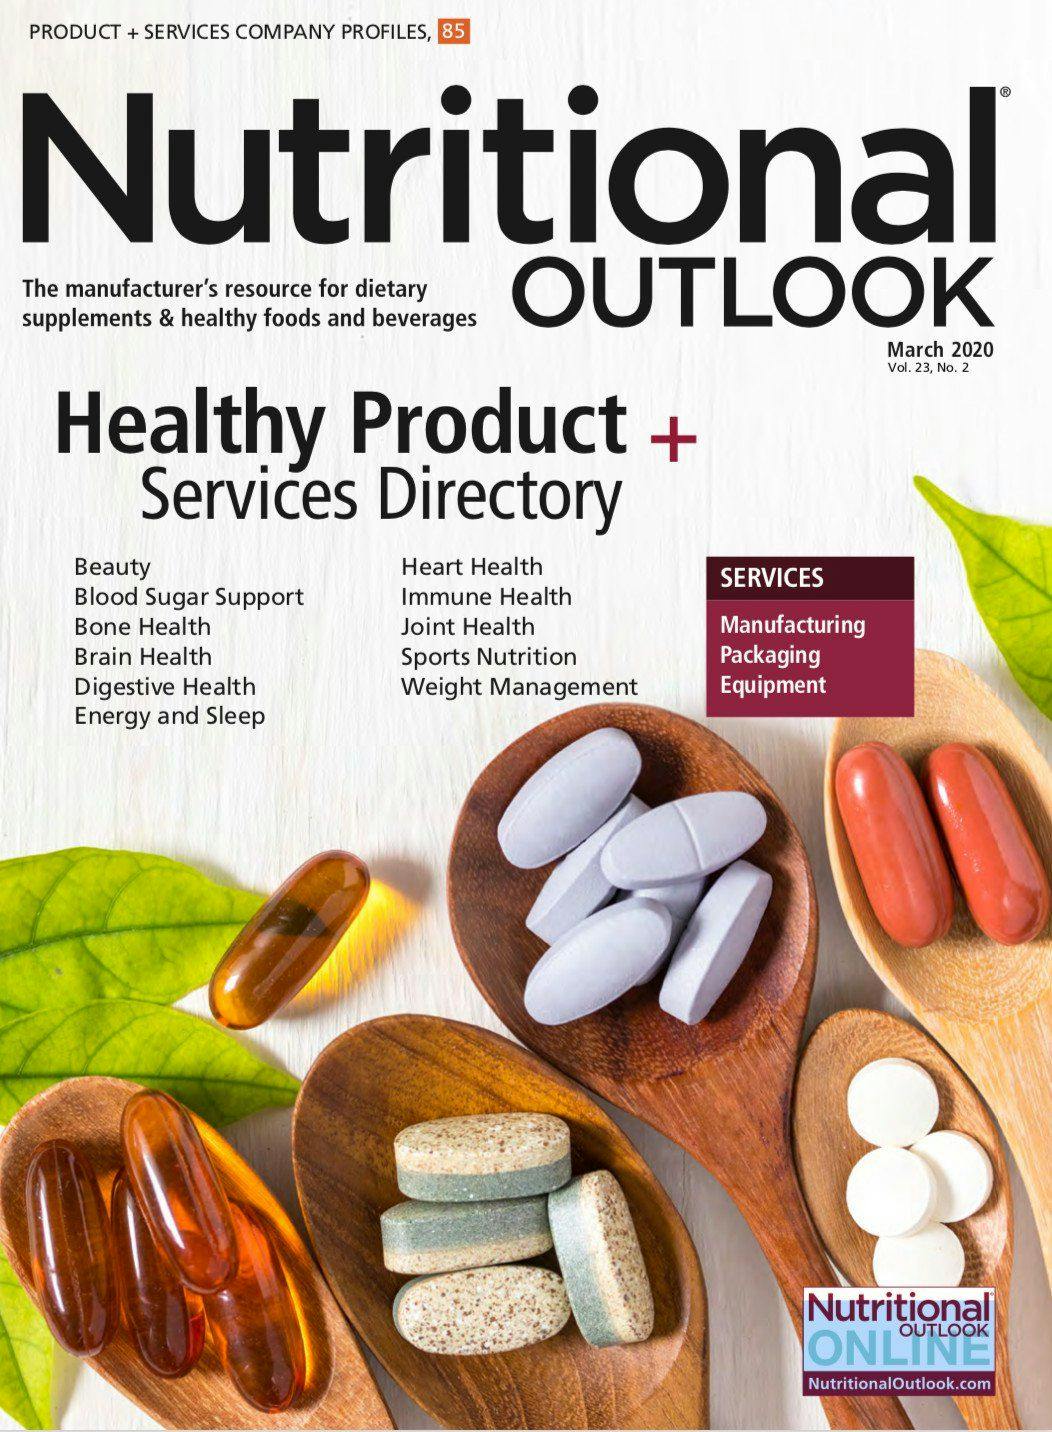 Nutritional Outlook Vol. 23 No. 2